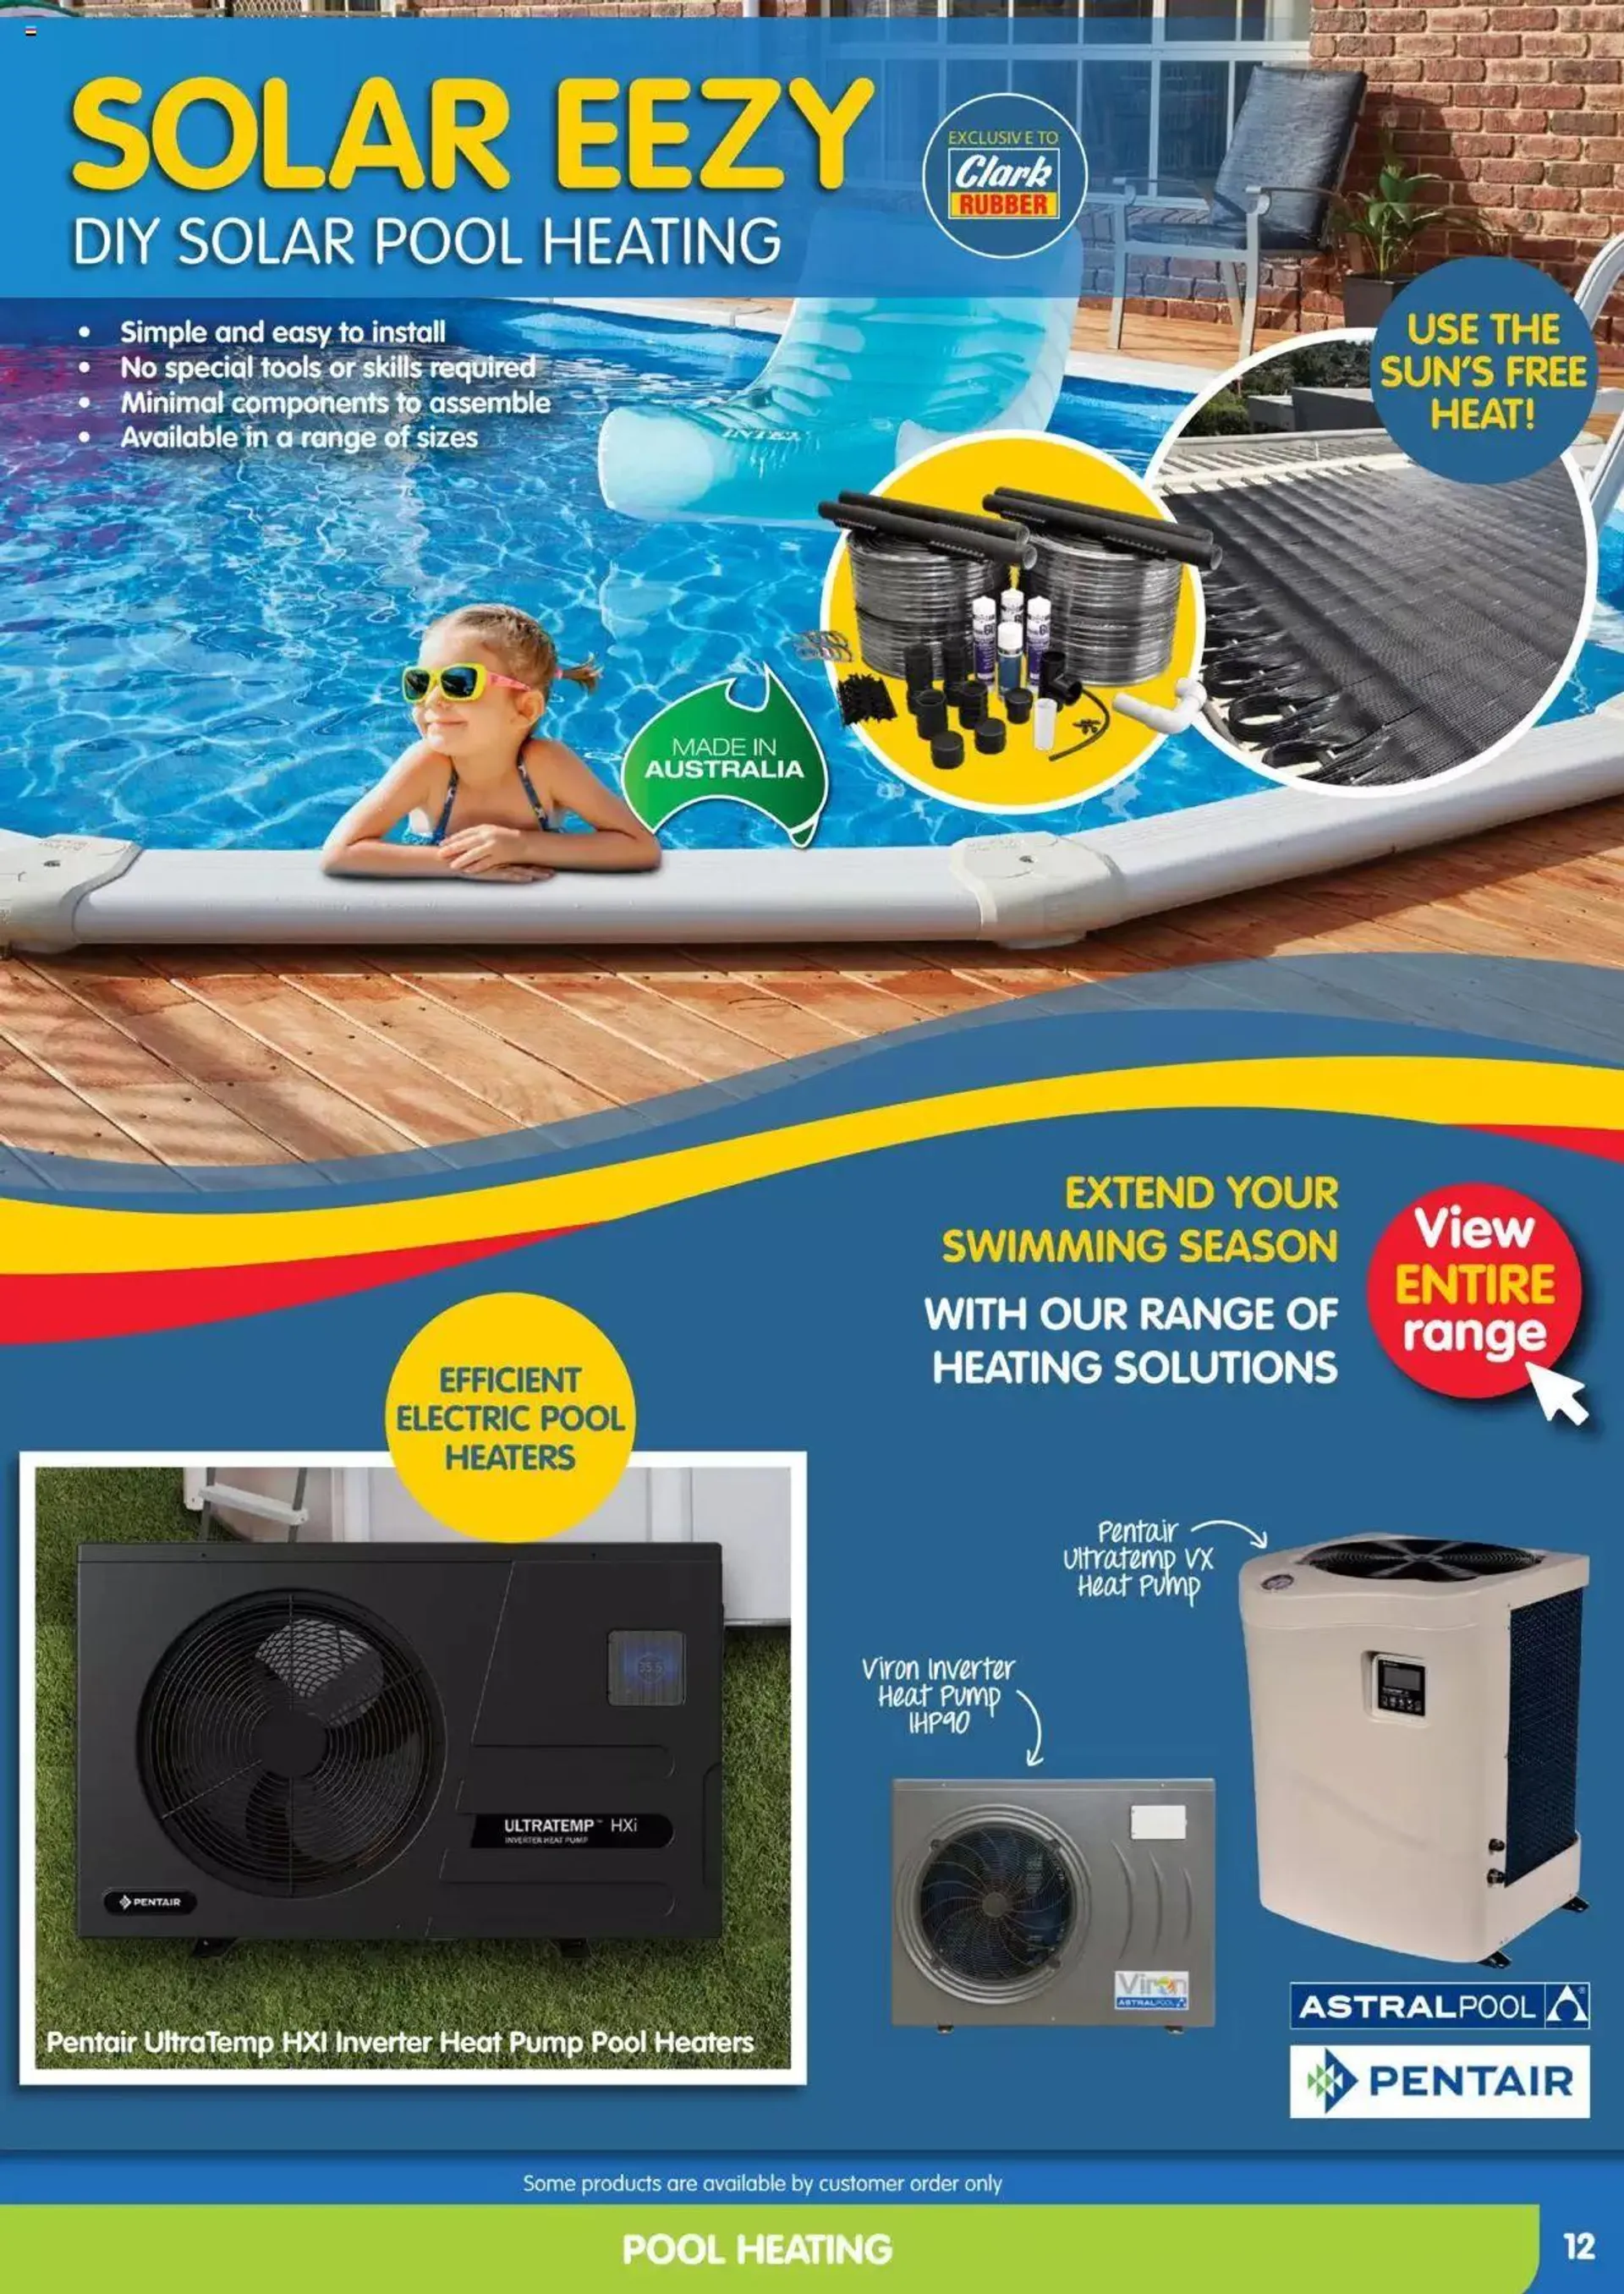 Clark Rubber - Your Pool Specialists - 11